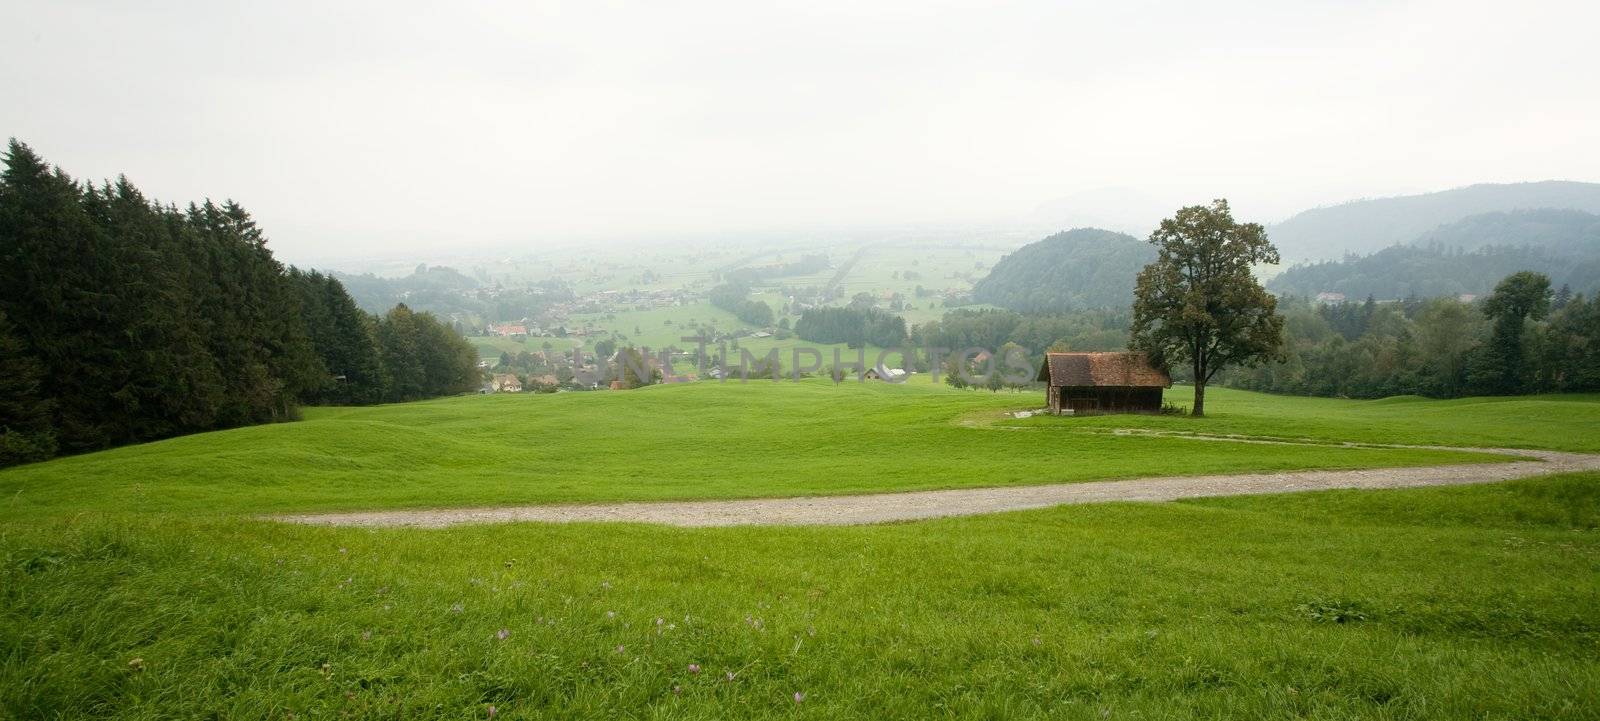 An image of a green plain and a house